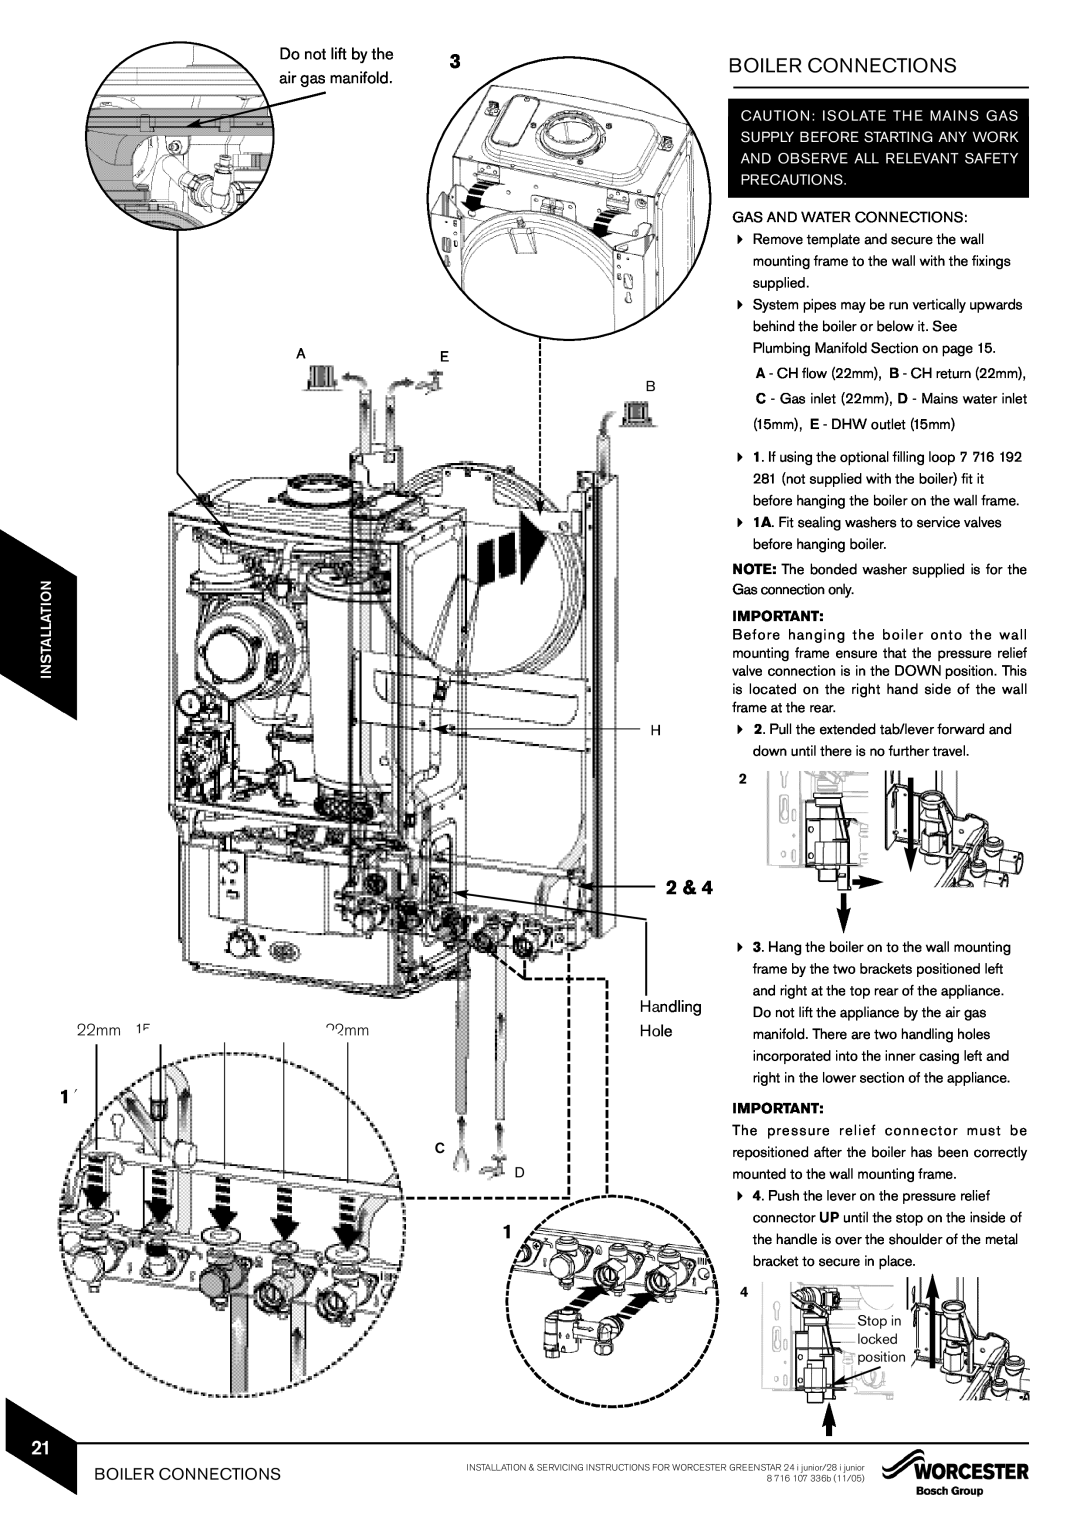 Bosch Appliances 28i junior manual Boiler Connections, Do not lift by the, air gas manifold, 22mm 15mm 22mm 15mm 22mm, Hole 